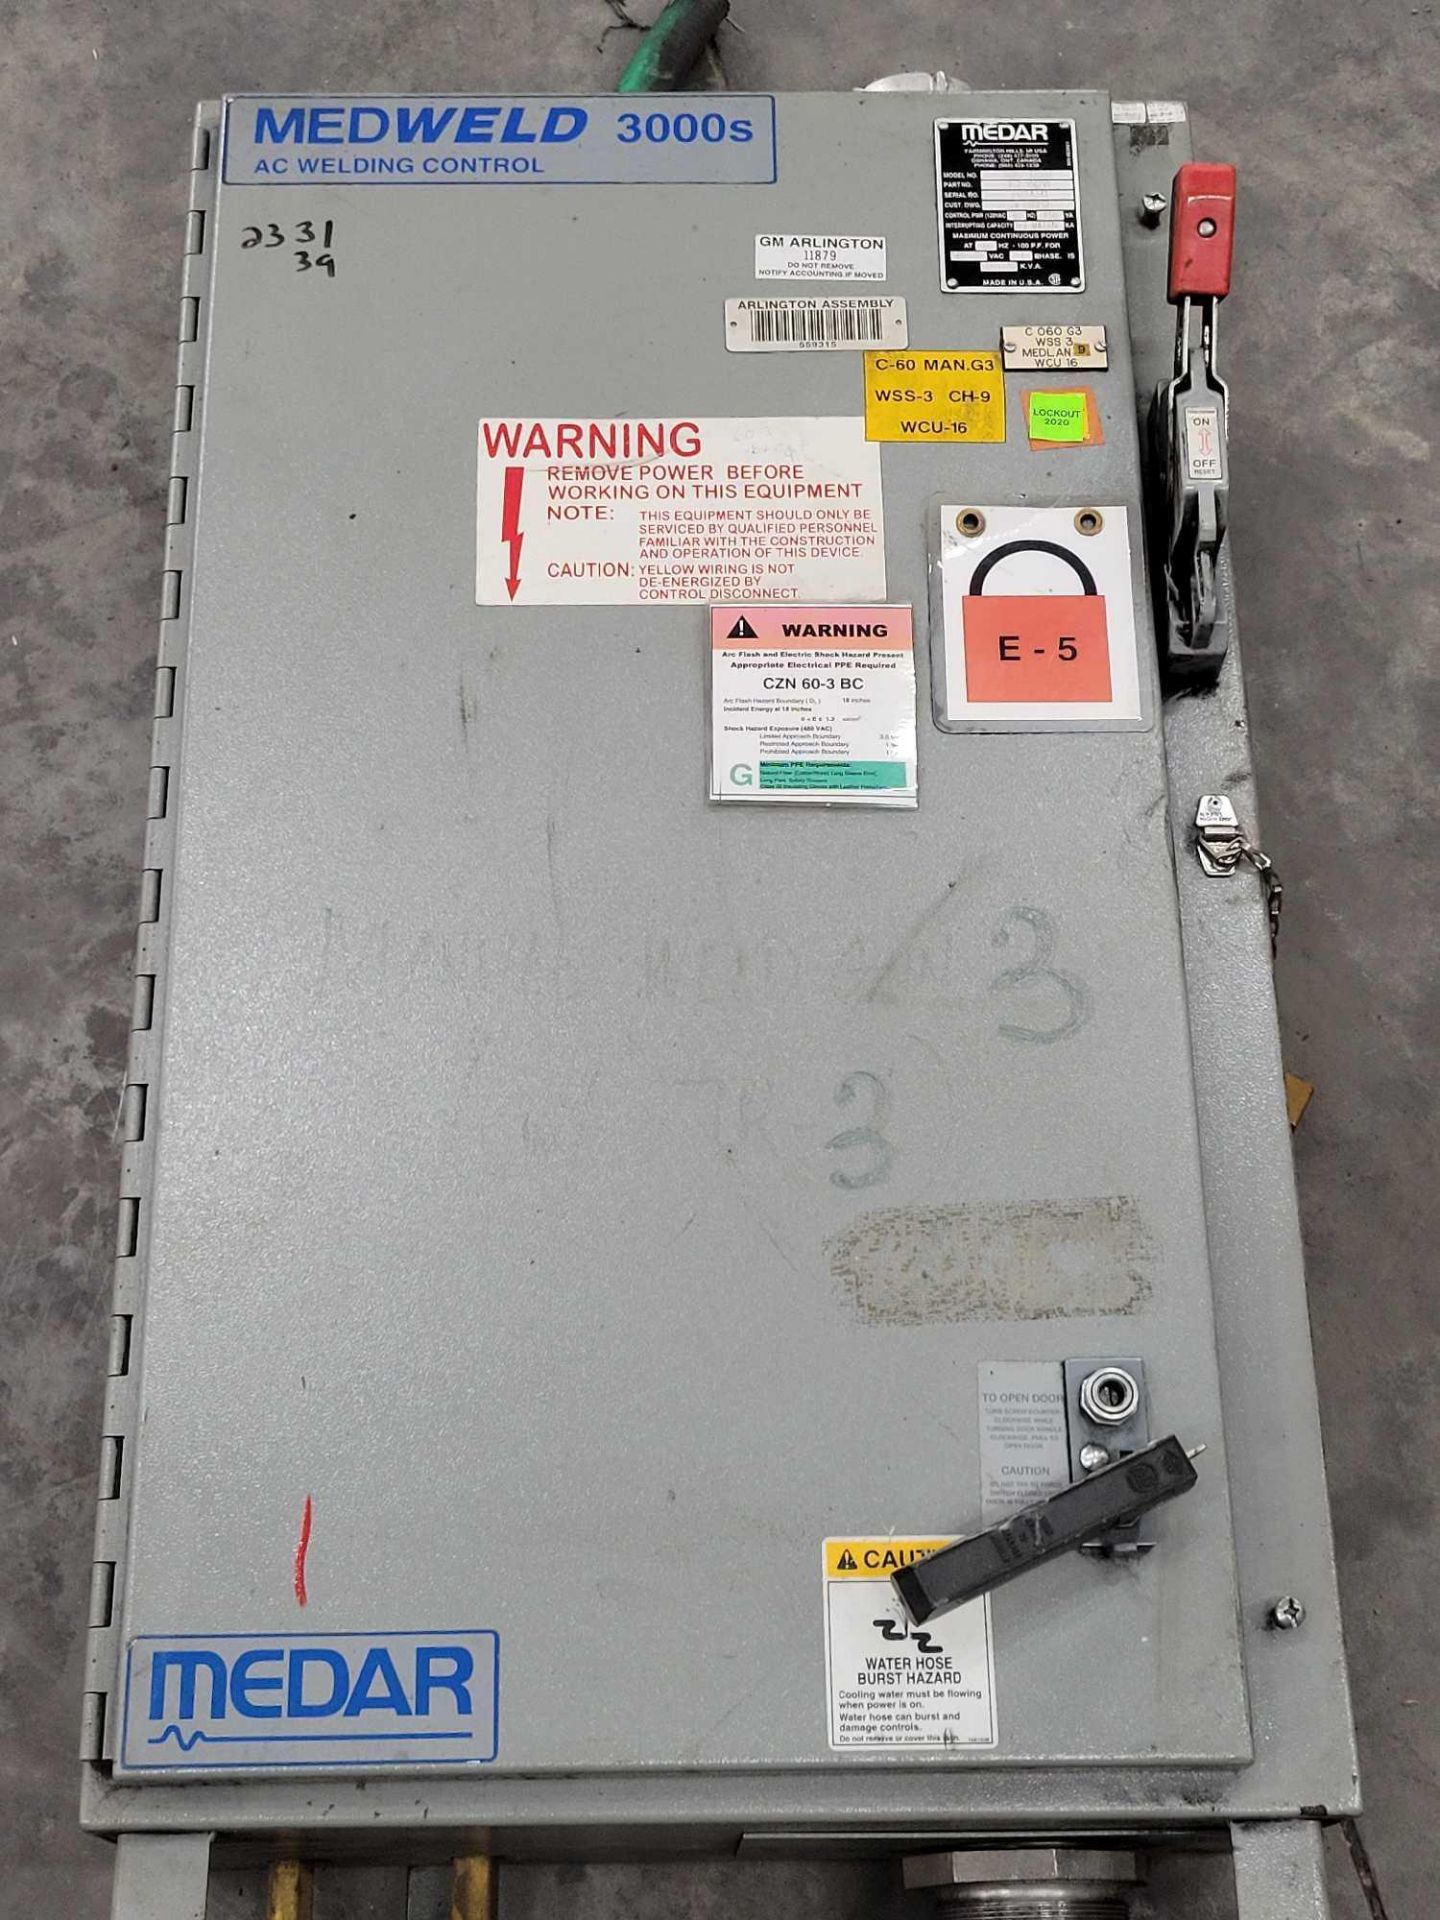 MEDWELD 3000S AC WELDING CONTROL CABINET